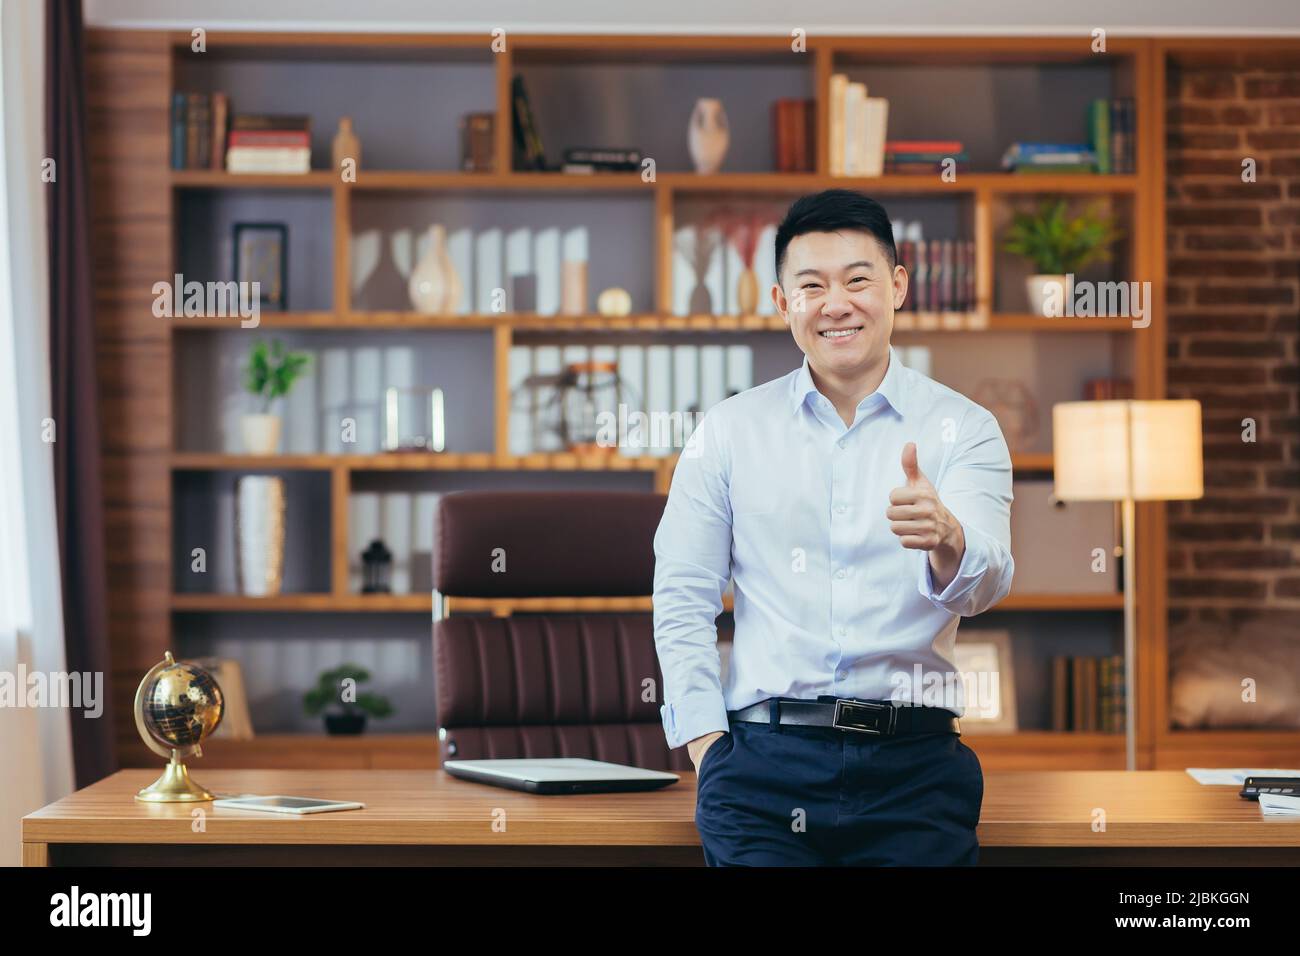 Portrait of a successful university principal, Asian teacher in a shirt looks at the camera and smiles, keeps his finger up, encourages young people t Stock Photo